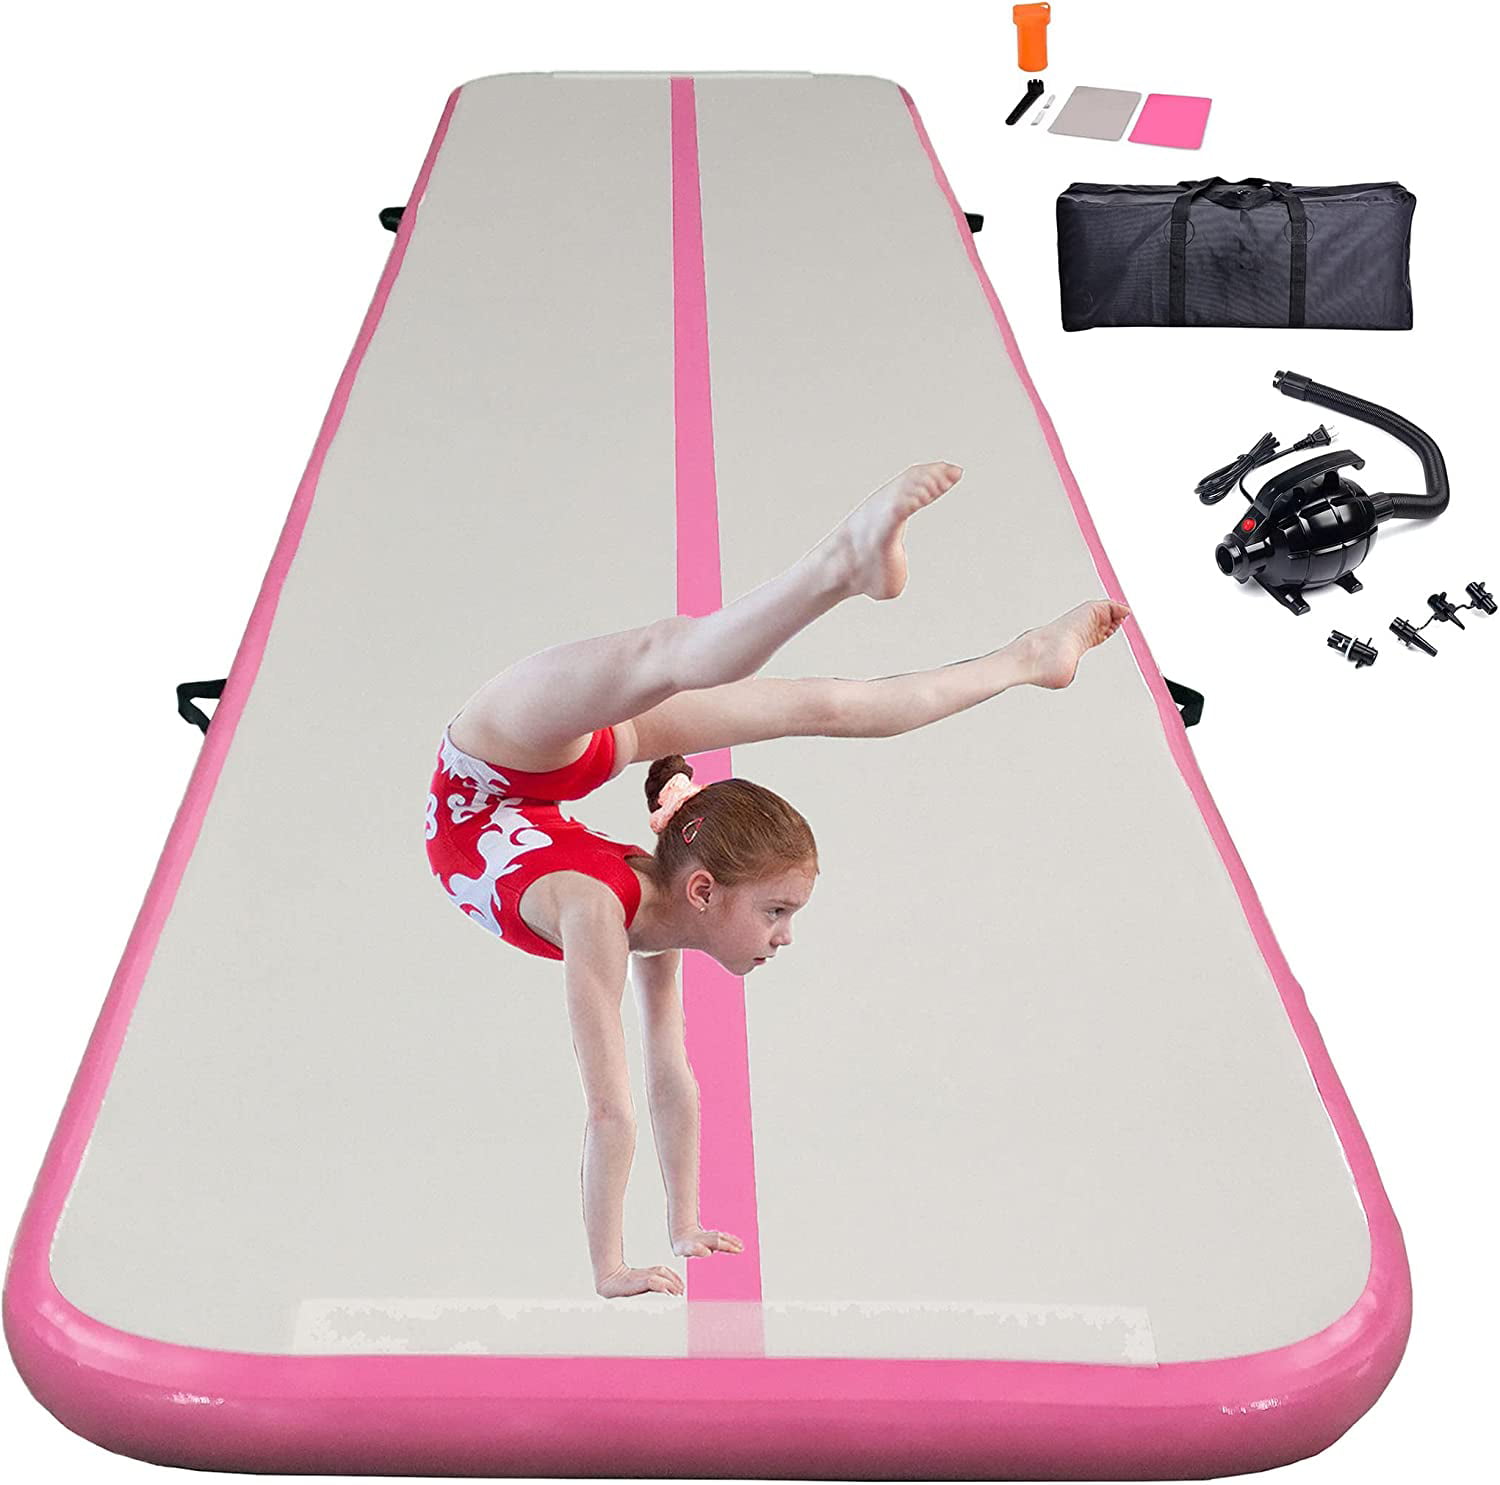 CZGBRO Air Roller Air Spot Gymnastics Air Barrel Air Mat Tumble Track Gymnastic Equipment Inflatable Tumbler Backbend Trainer with Electric Pump for Yoga Cheerleading Home & Water Use 